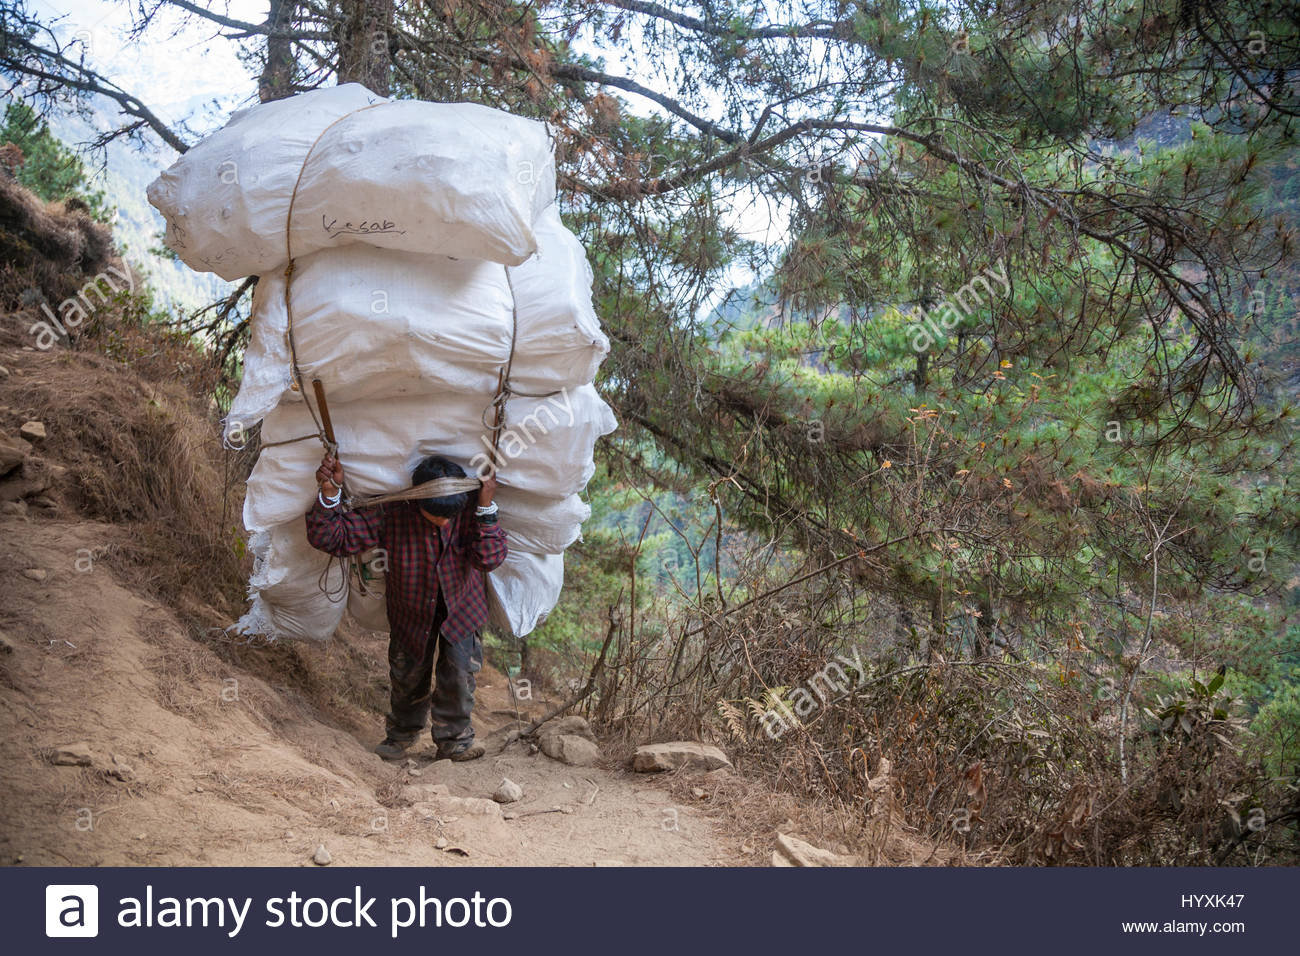 a-man-carrying-a-huge-load-on-his-back-up-a-steep-unpaved-trail-HYXK47.jpg